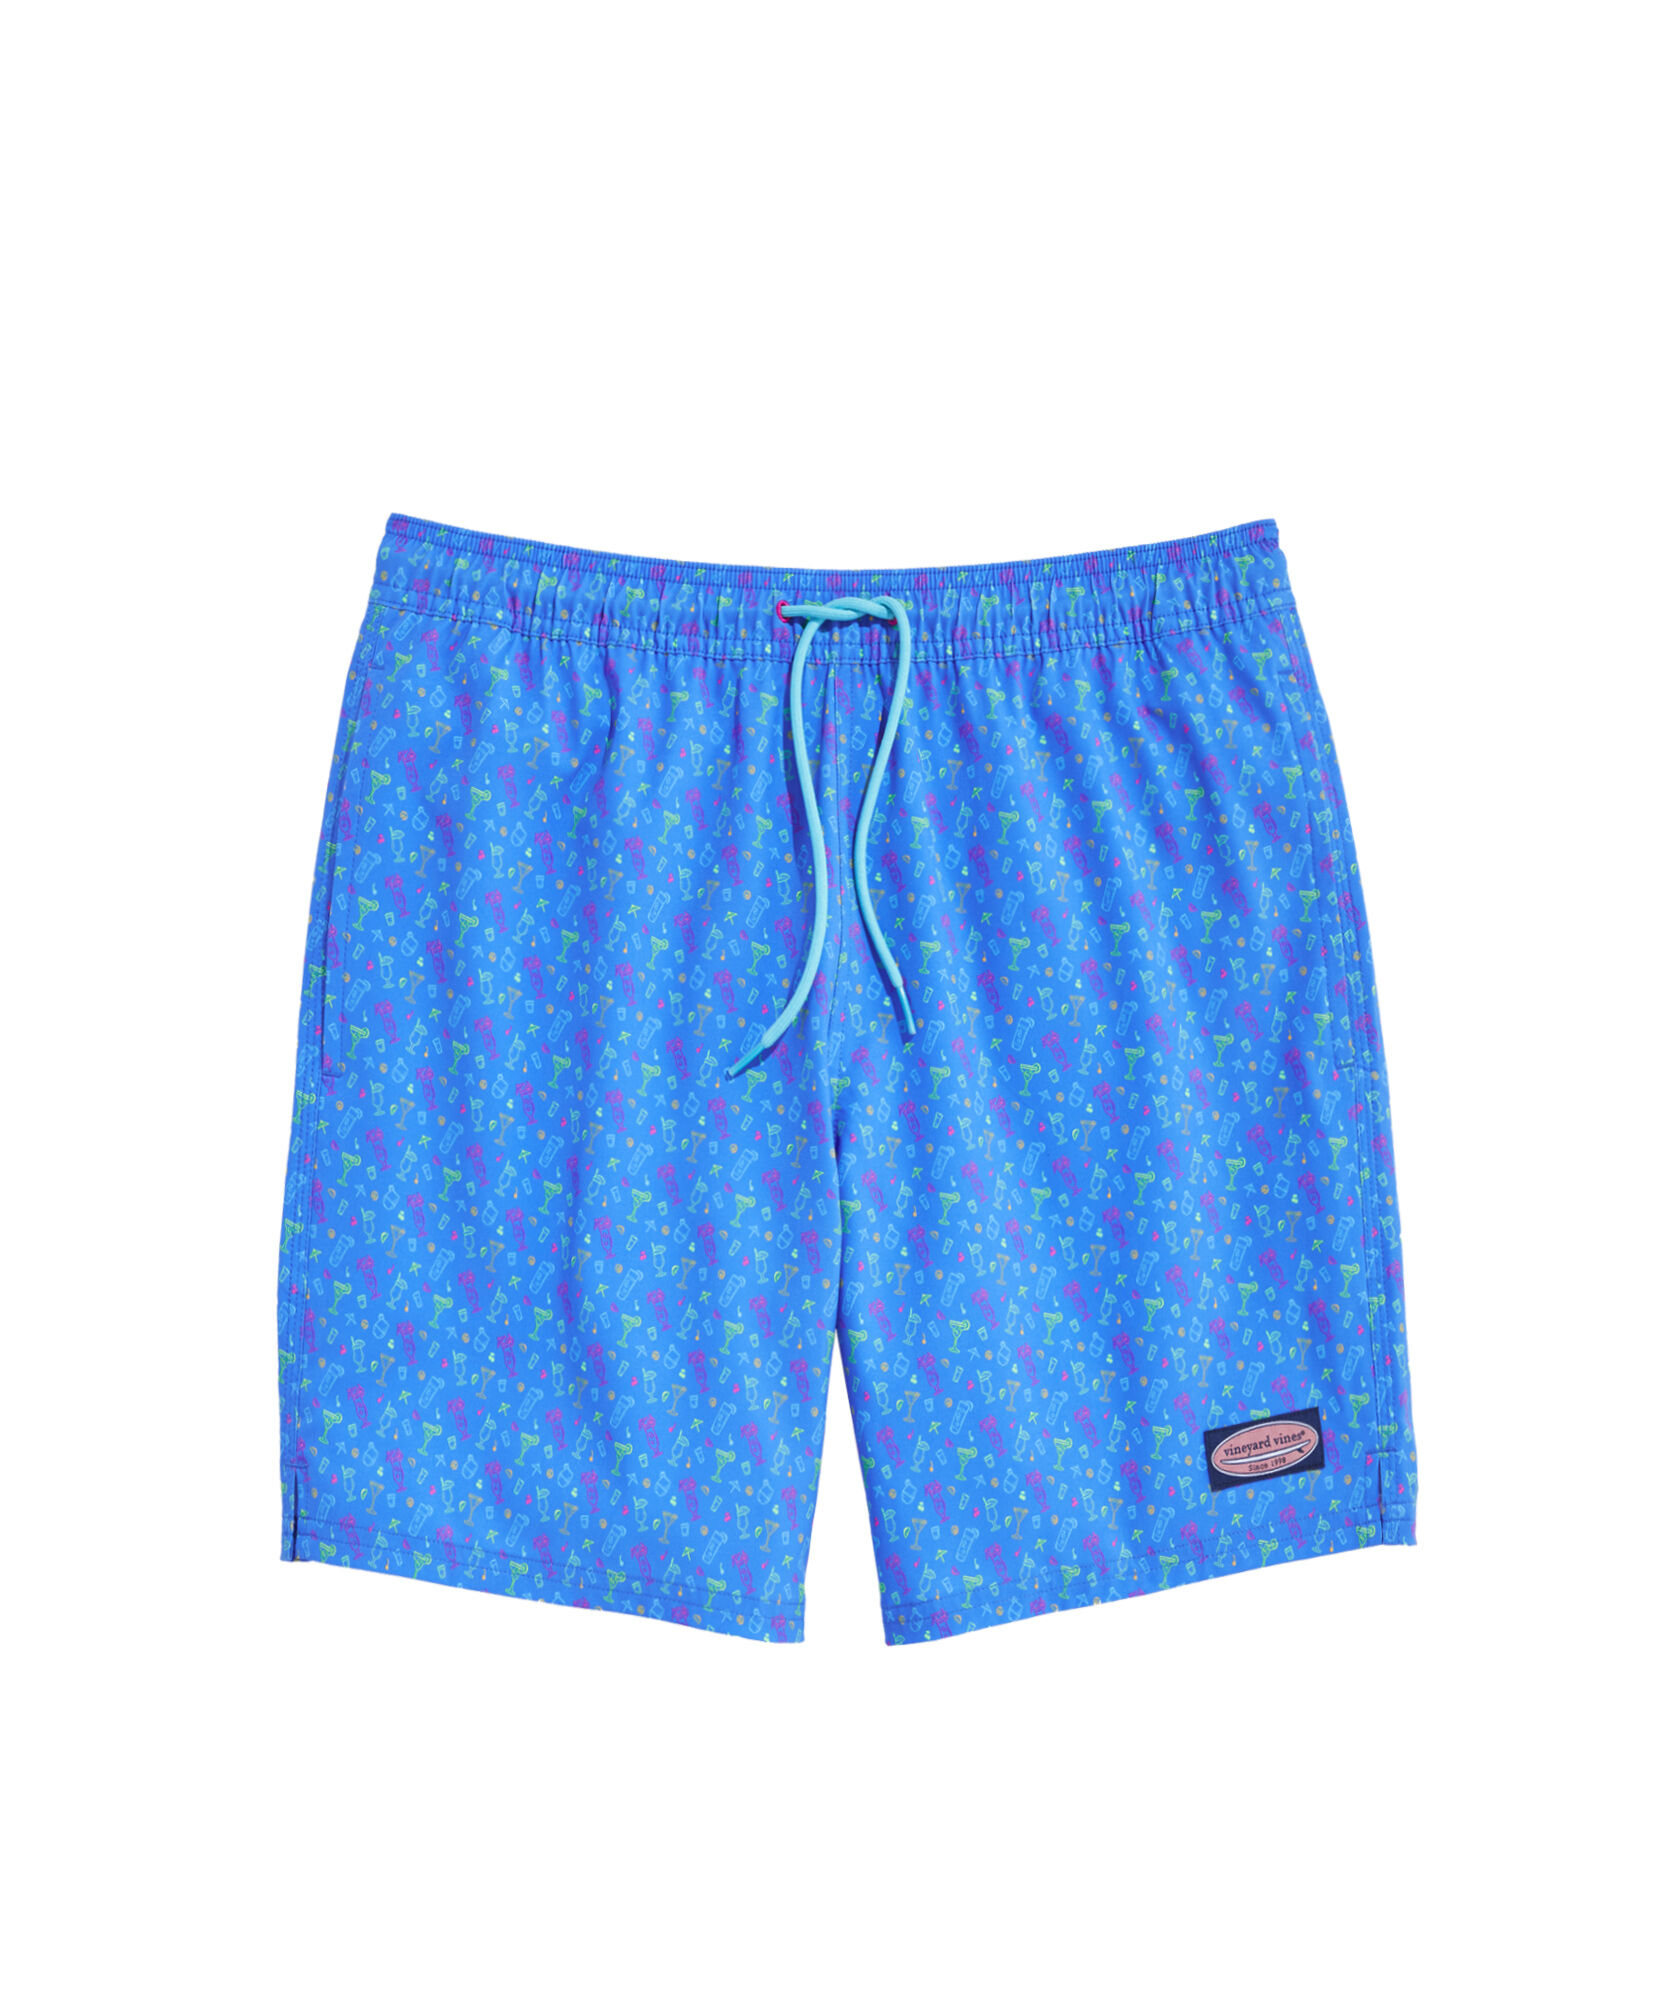 OUTLET Printed Chappy Swim Trunks